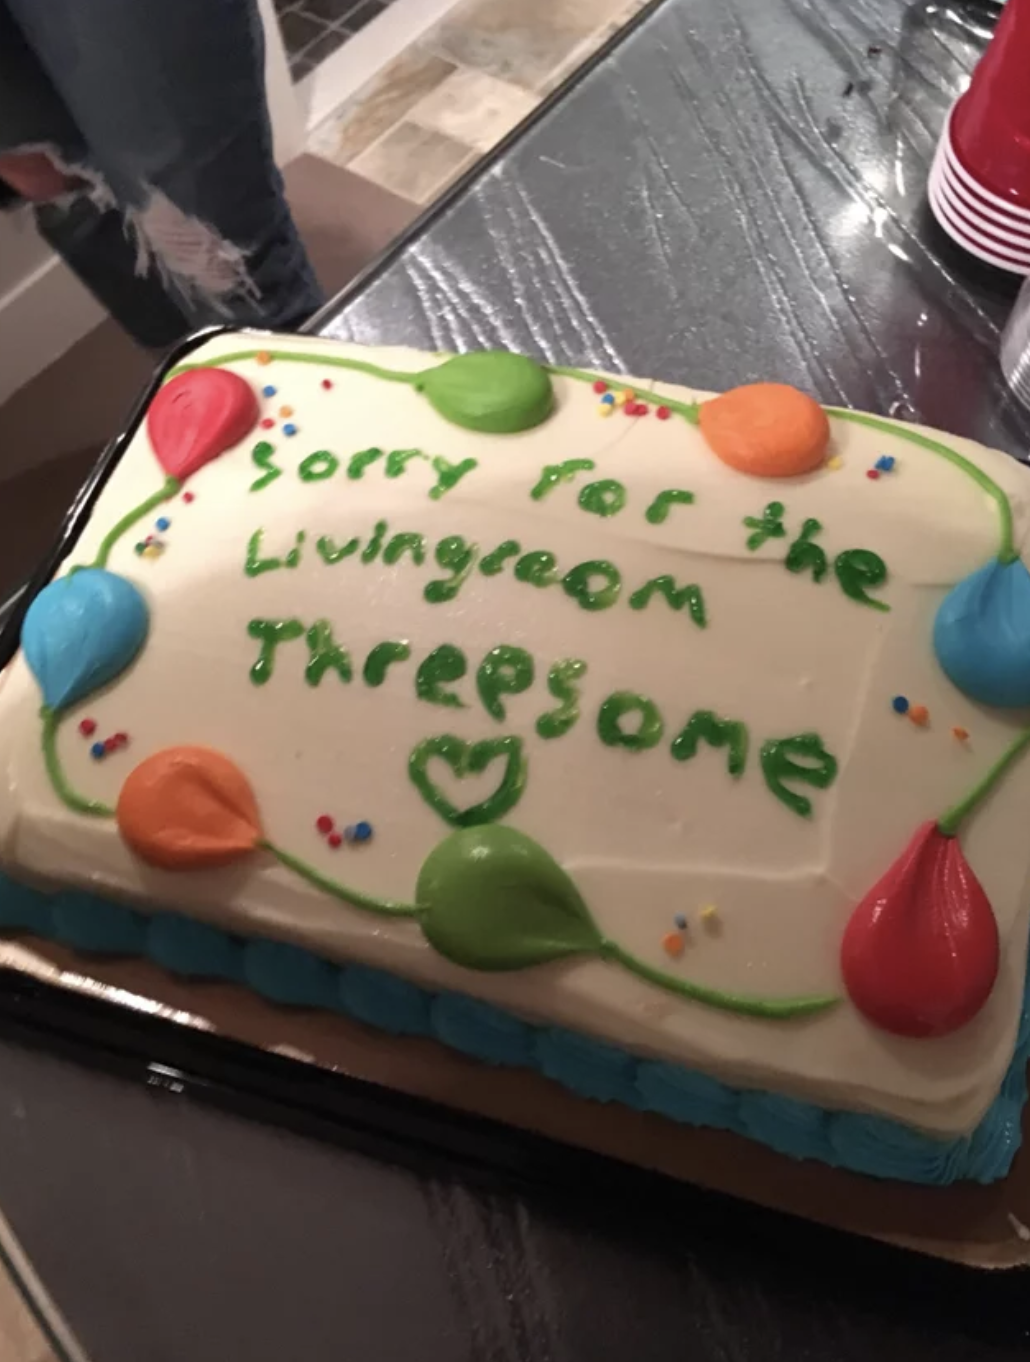 Wife Gets 'Nobody Cares' Cake for Husband, Goes Viral